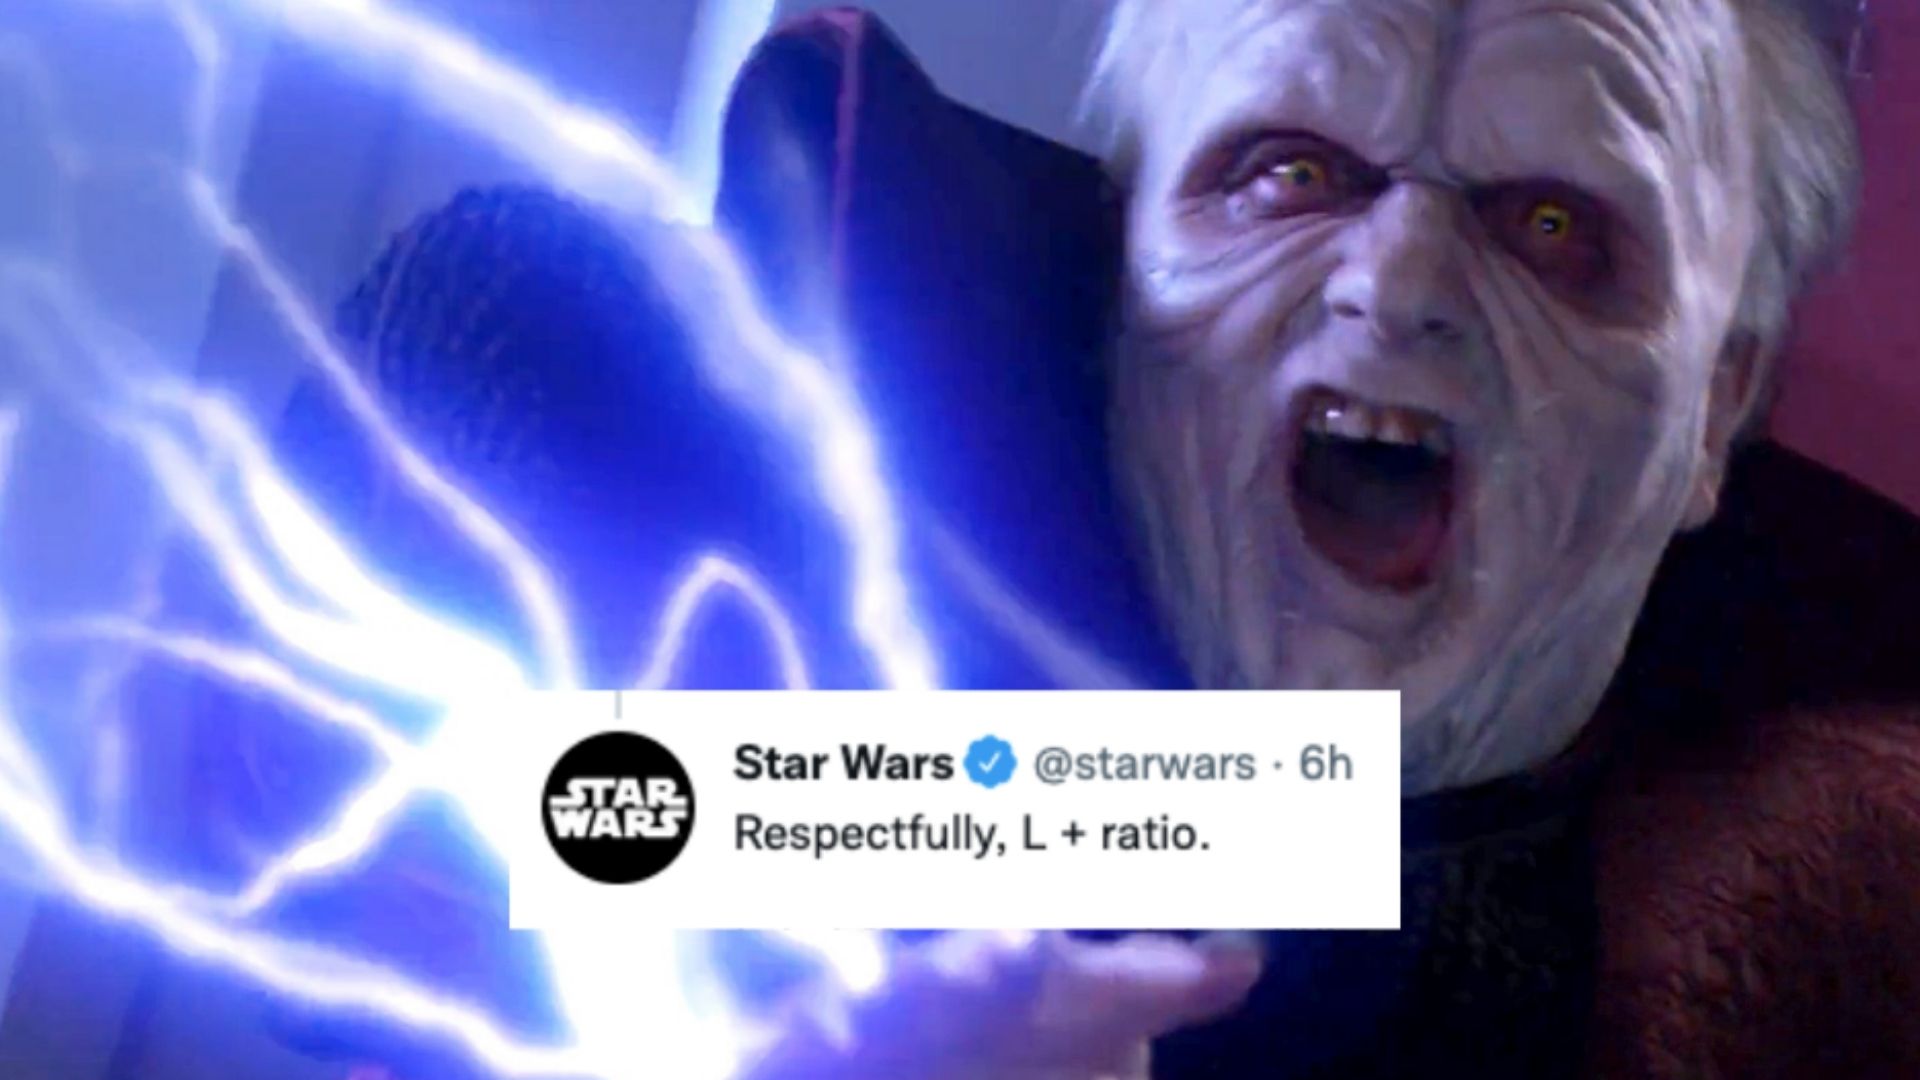 Official Star Wars record executes Order 66 on the Twitter troll